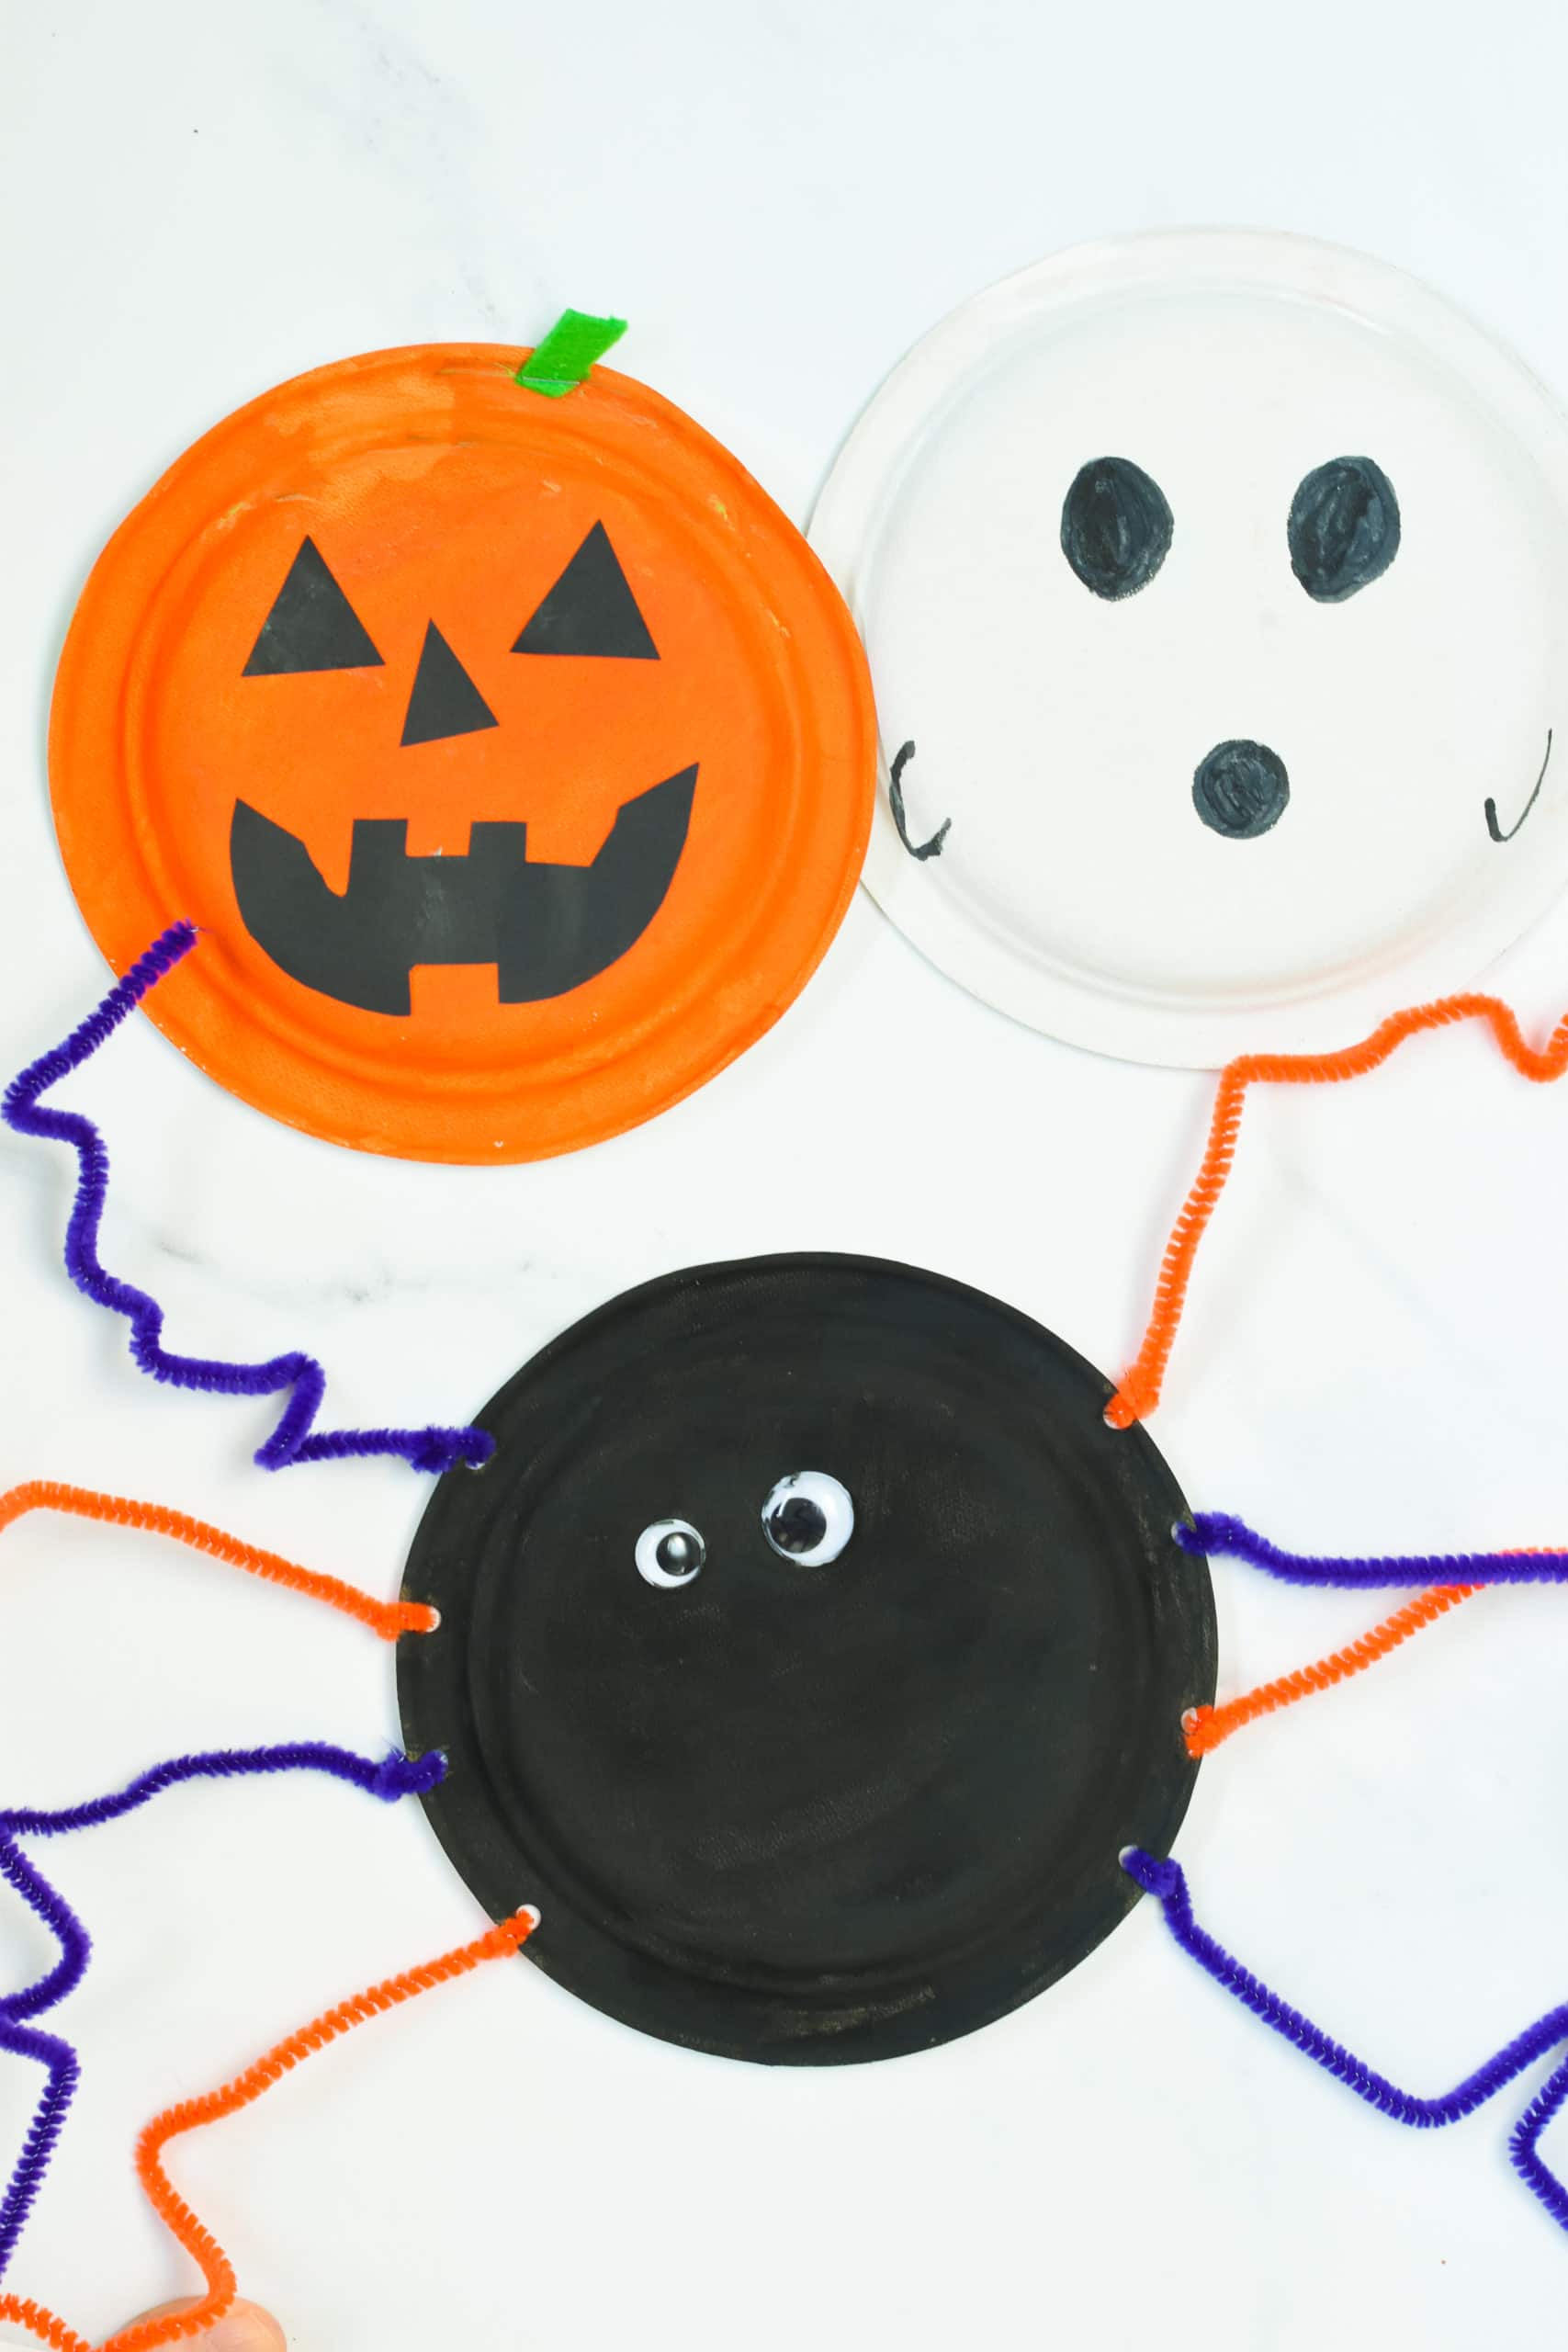 3 Paper Plate Halloween Crafts Ideas3 Paper Plate Halloween Crafts Ideas